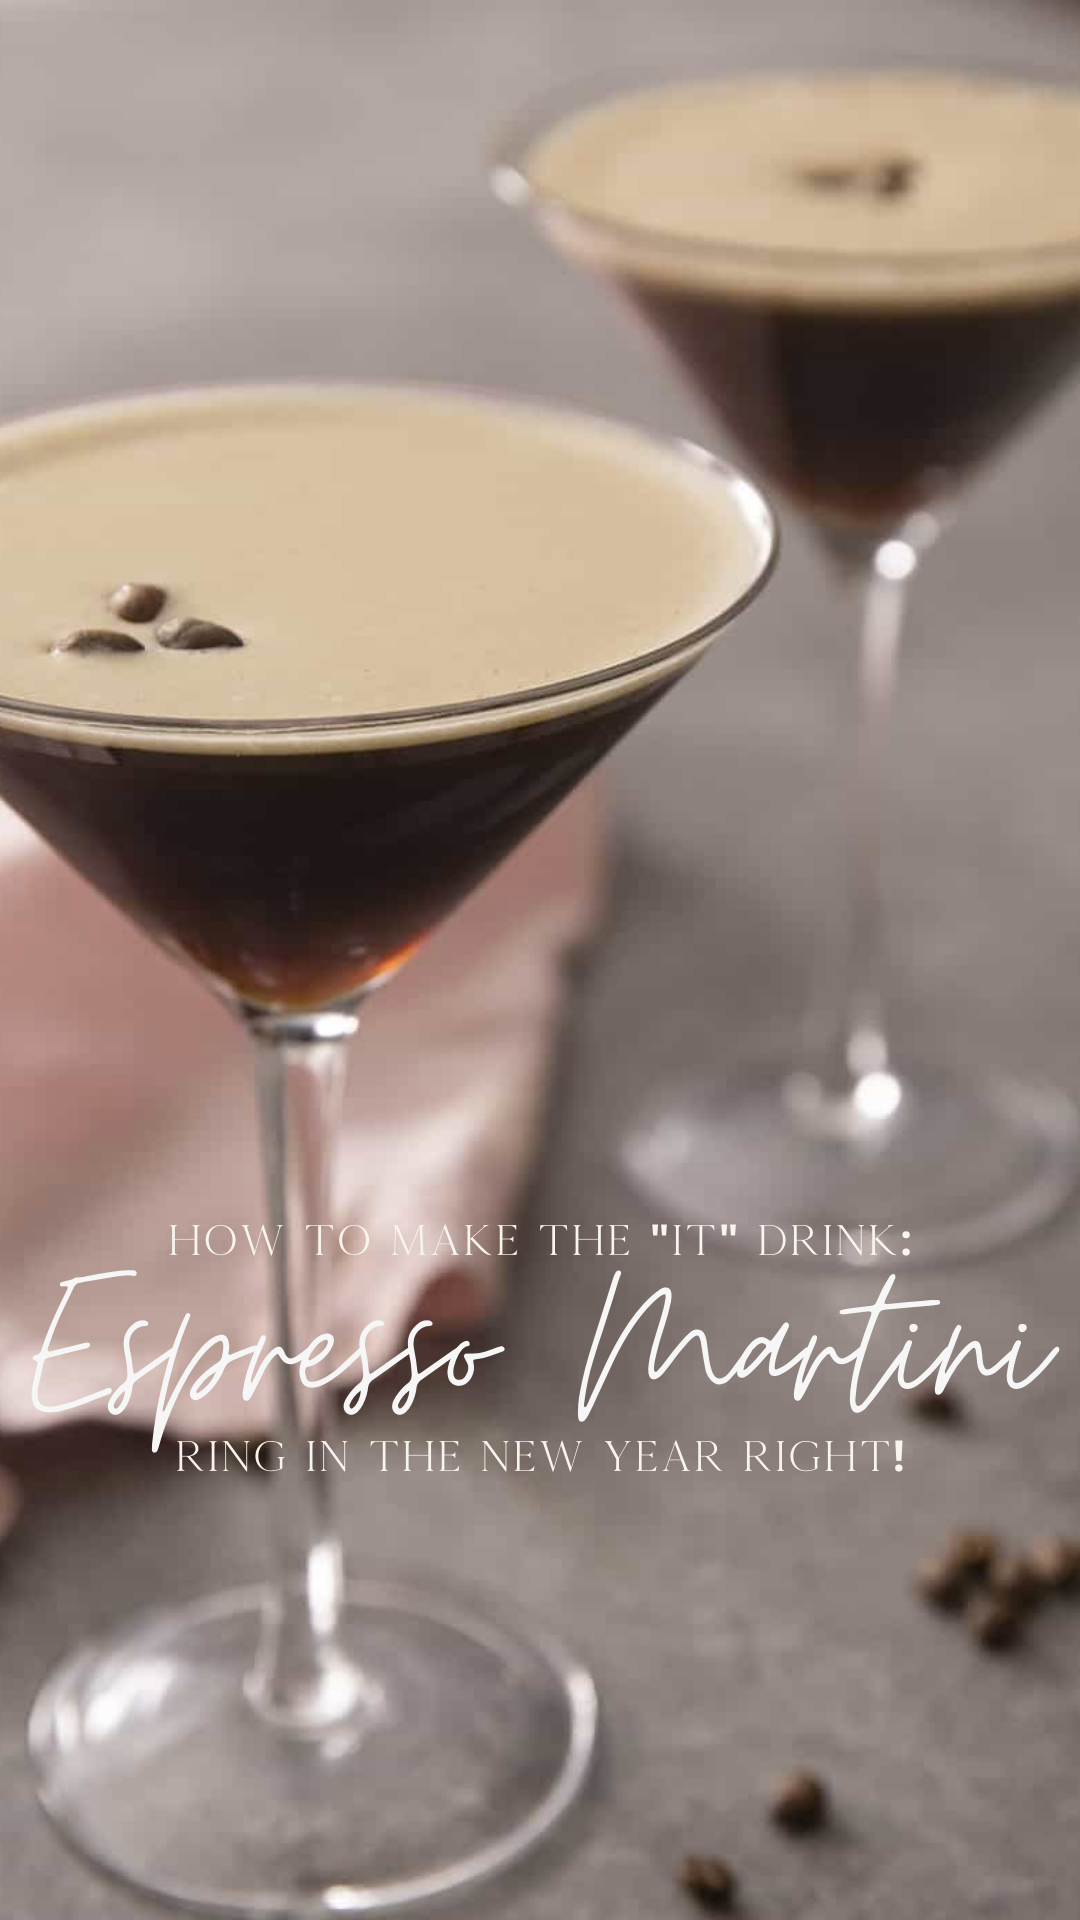 The 'It" Drink: How to Make an Espresso Martini